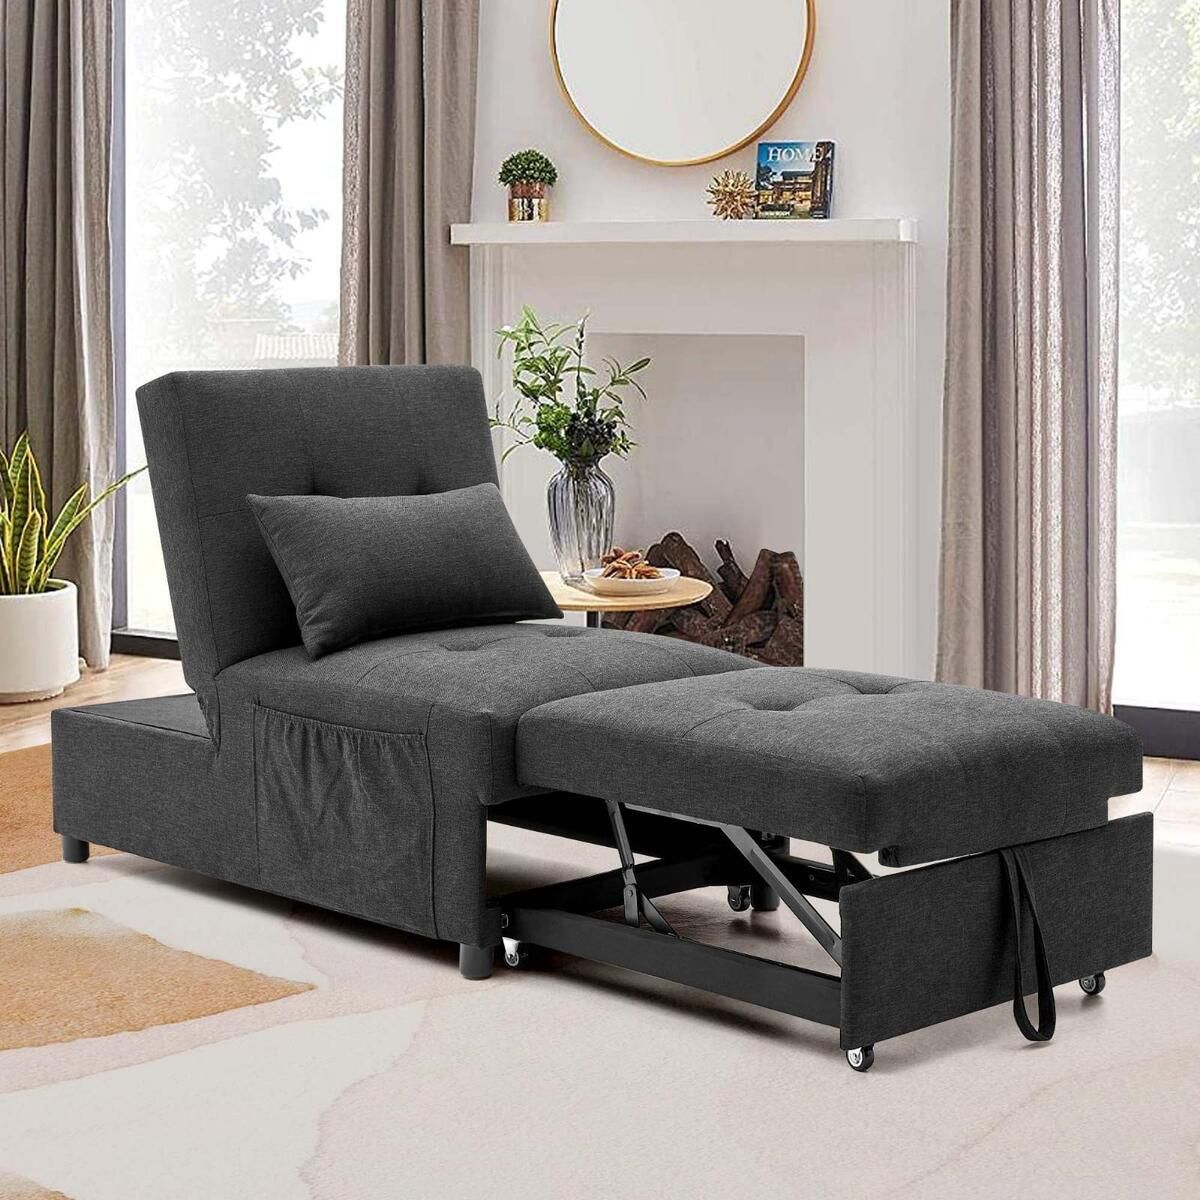 Convertible Sofa Chair Futon Bed 4 In 1 Pull Out Sleeper Chaise Home  Furniture | Ebay With Regard To 4 In 1 Convertible Sleeper Chair Beds (Photo 5 of 15)